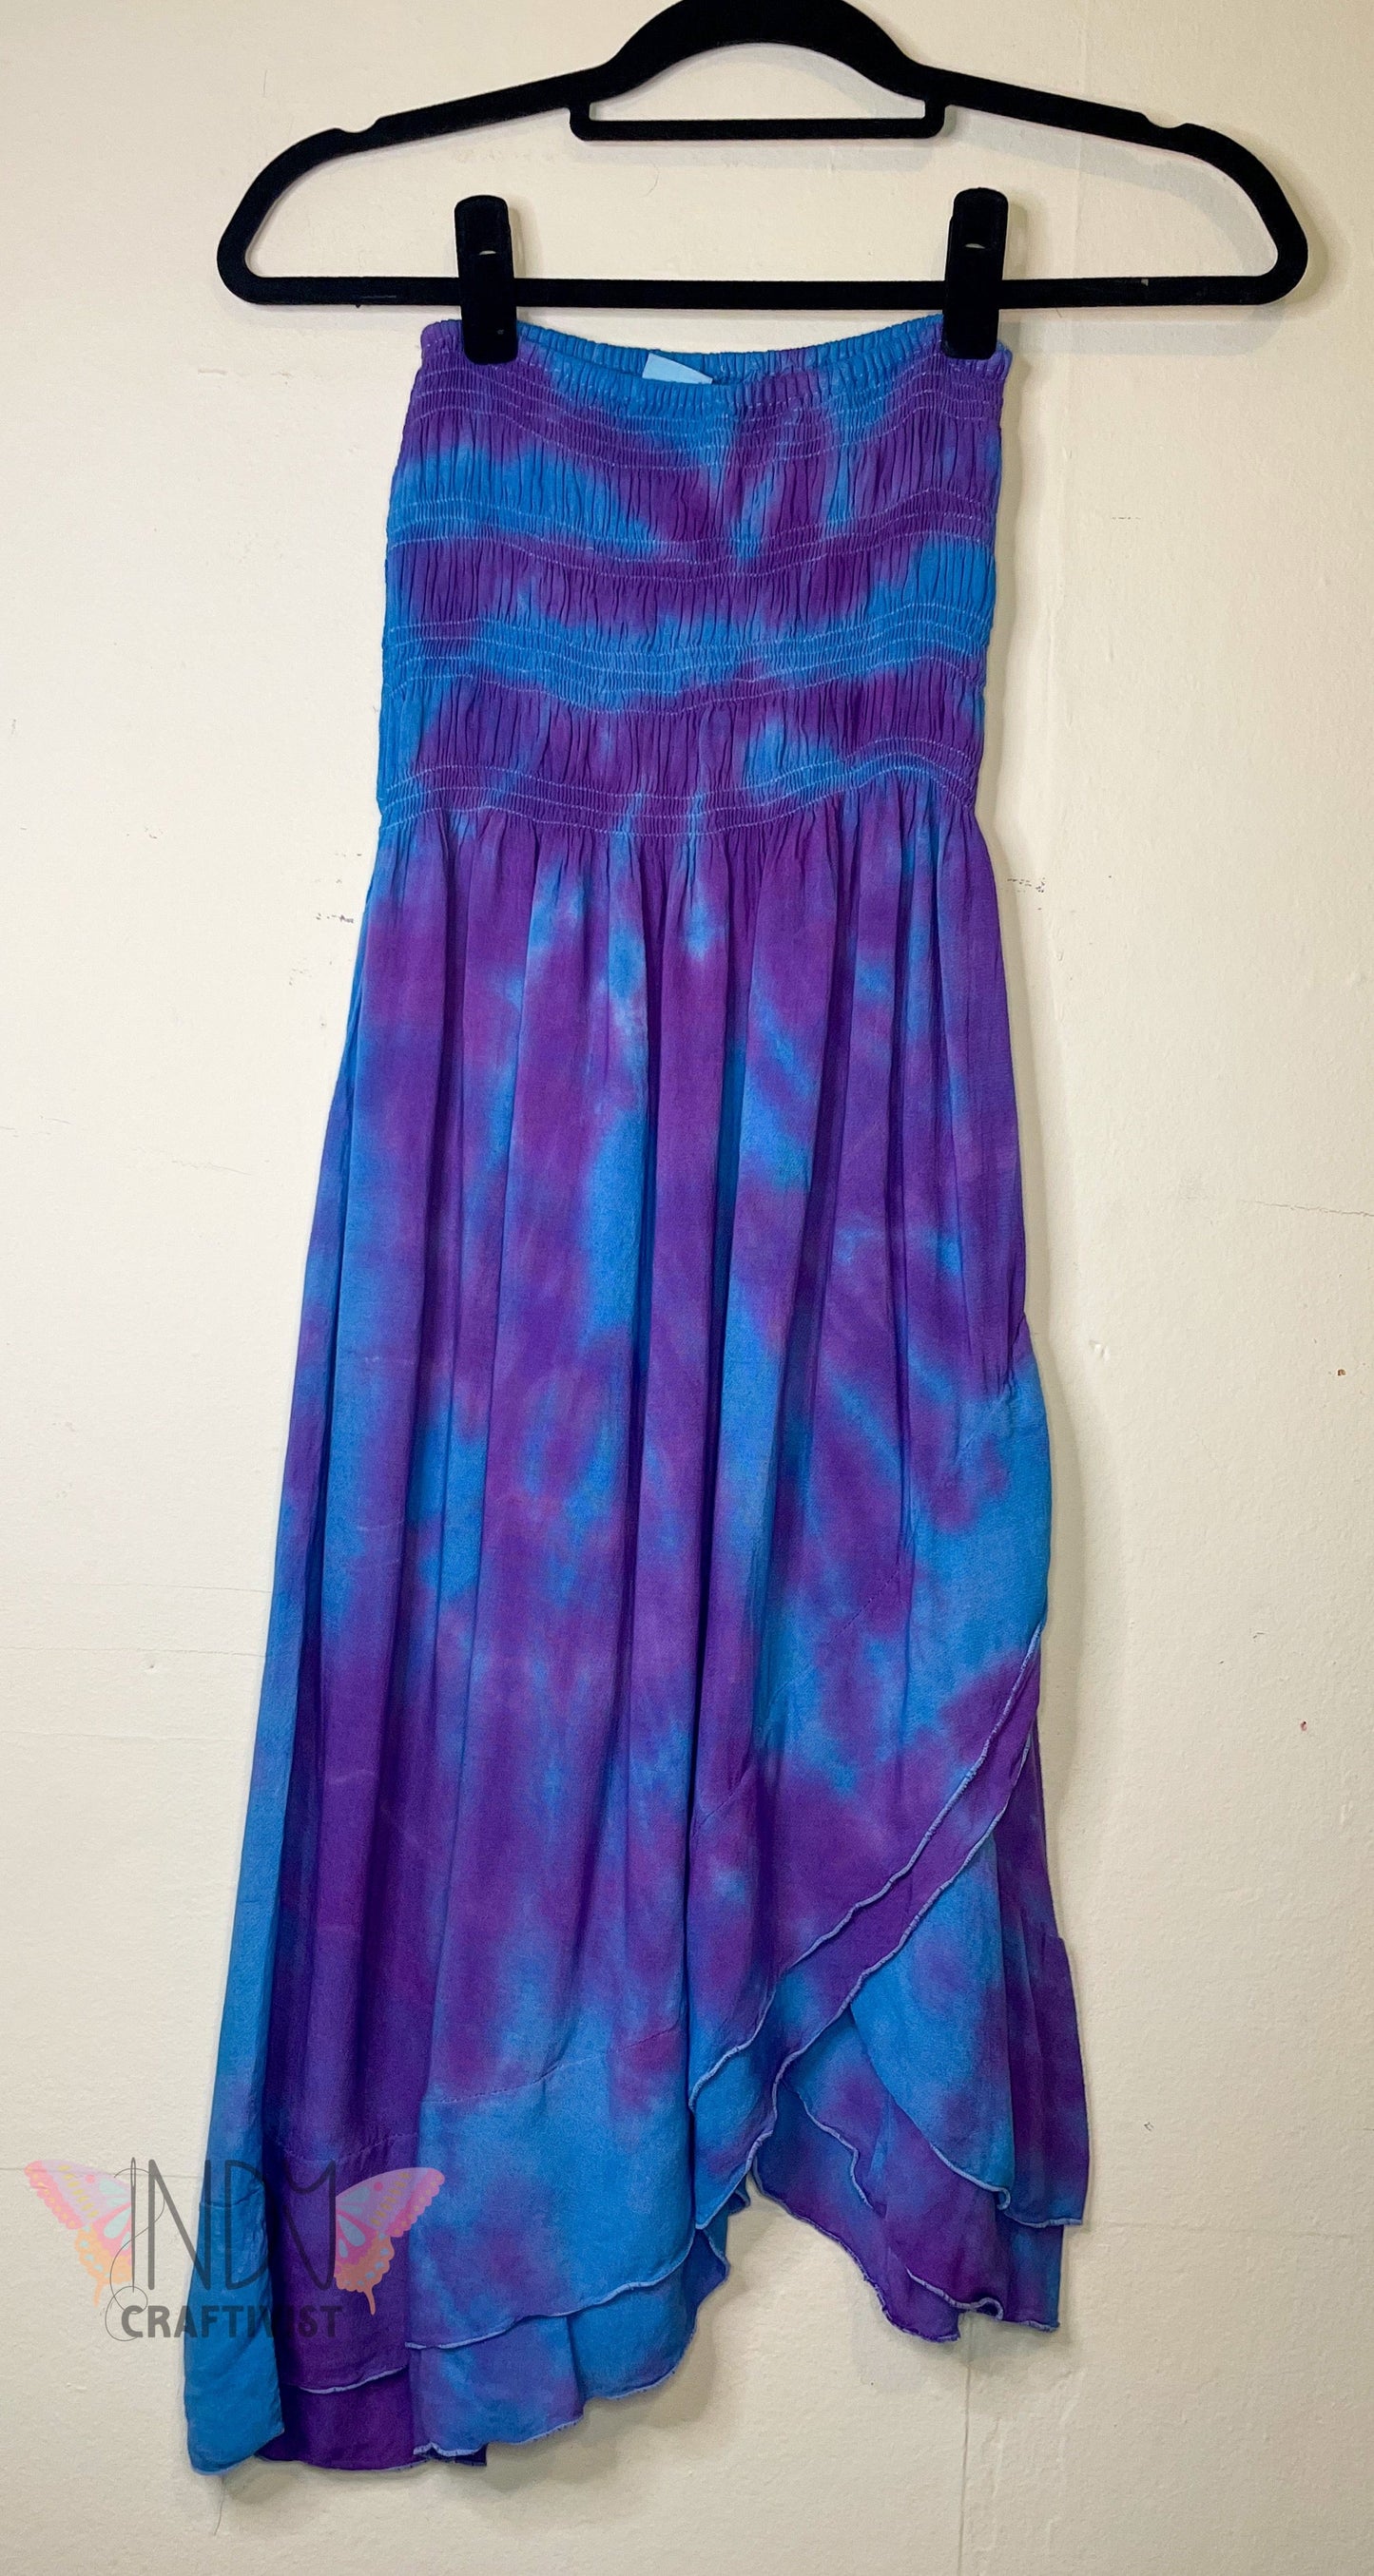 Adult Small Tie Dye Convertible Dress or Skirt